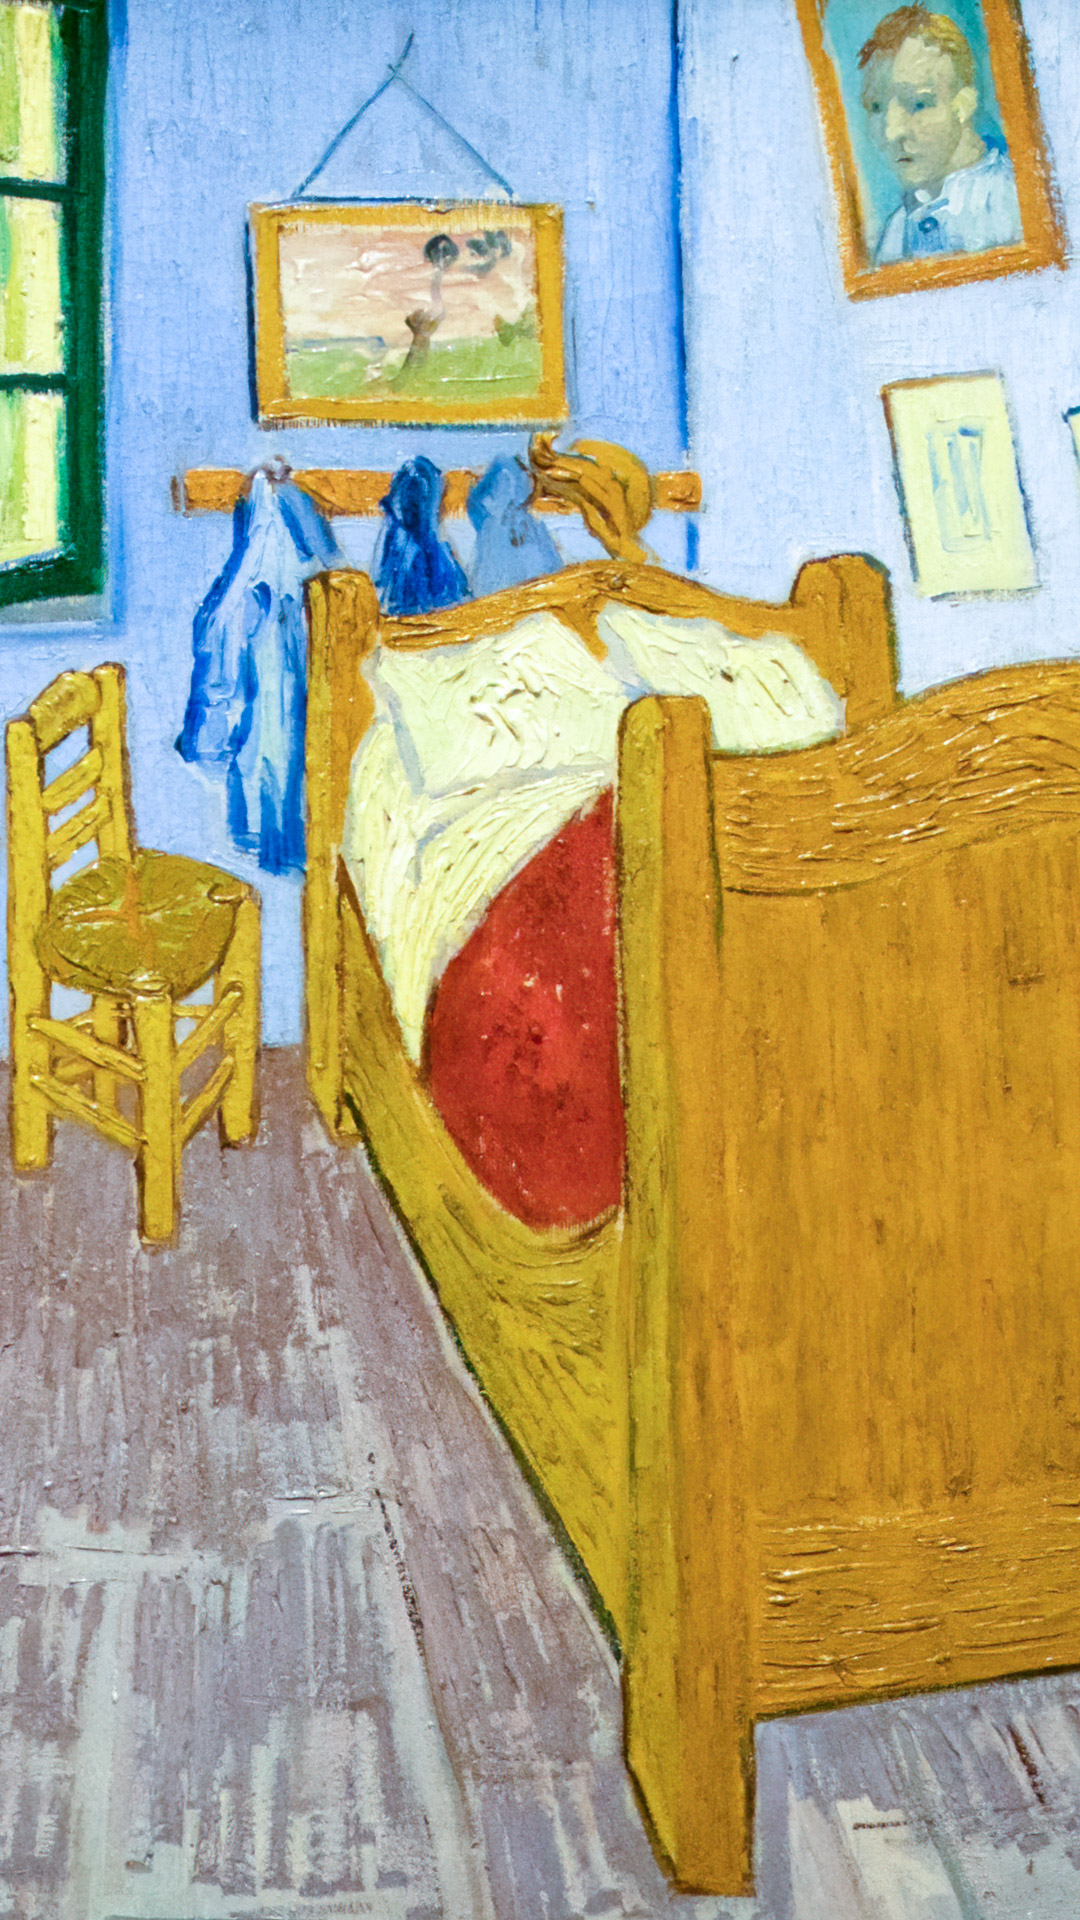 Transform your device’s screen with the Room in Arles impressionism wallpaper and experience the cozy and intimate atmosphere of Van Gogh’s bedroom in the Yellow House, where he lived and worked in Arles.